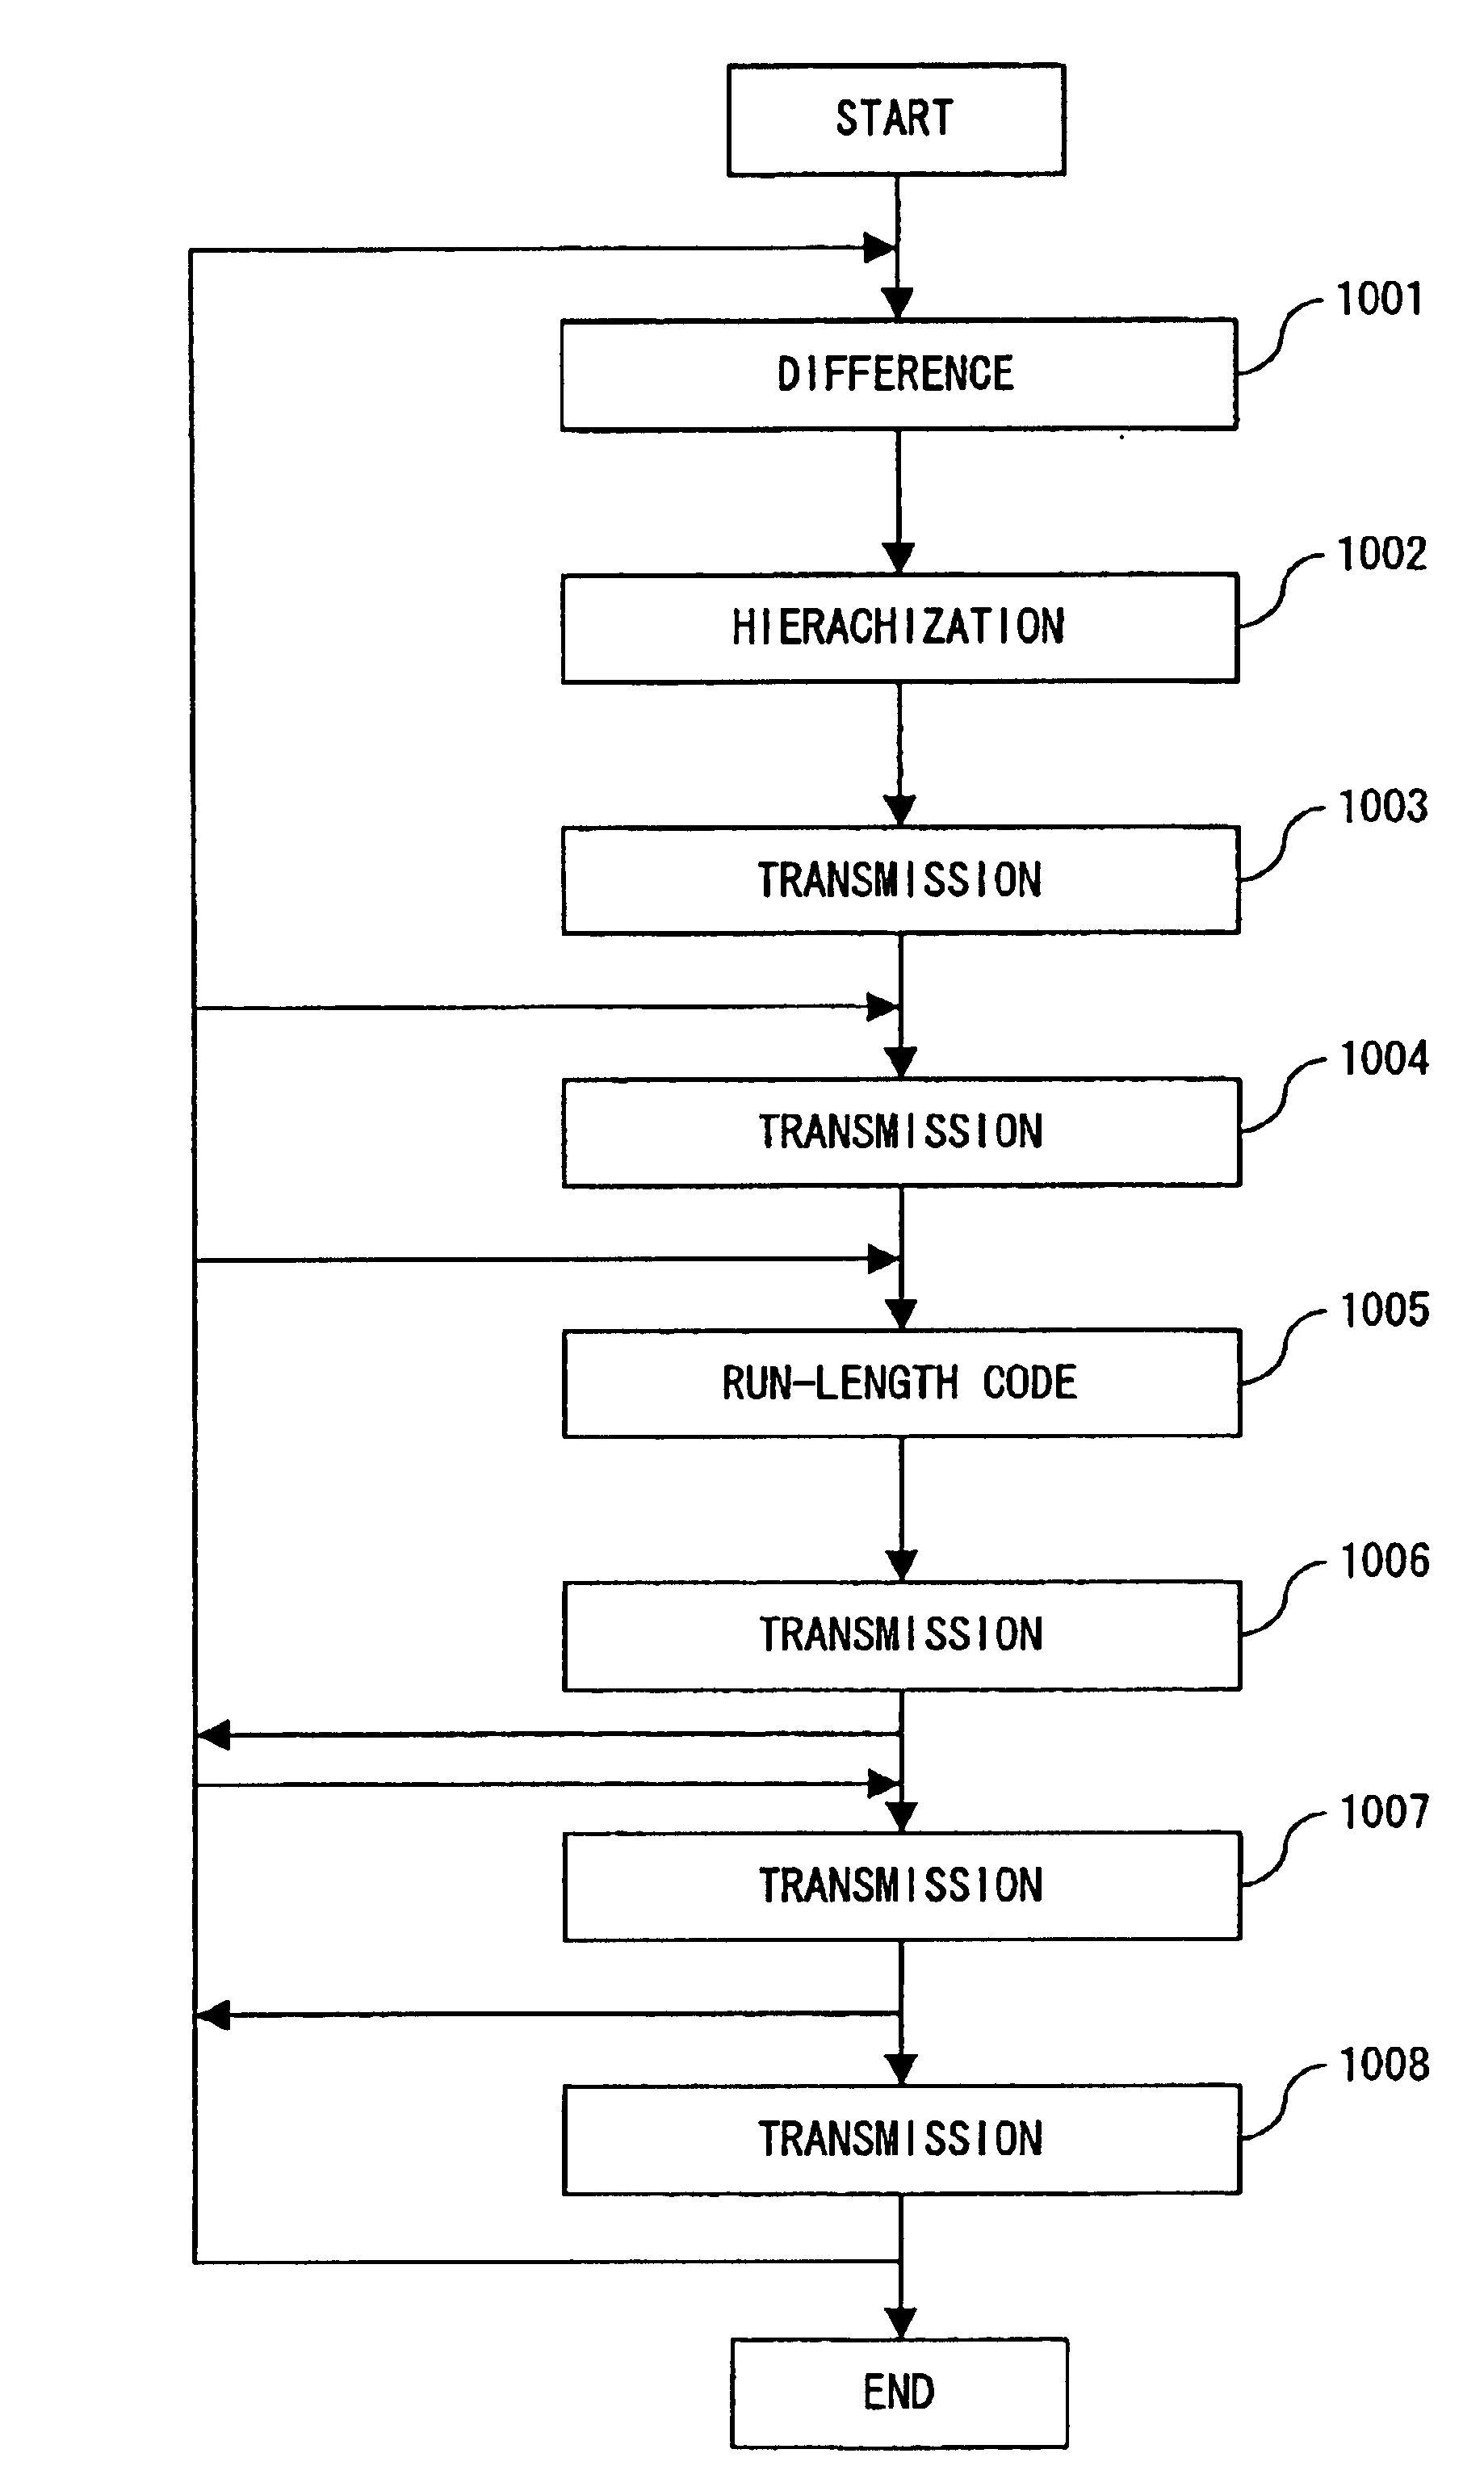 Hierarchical encoding and decoding devices